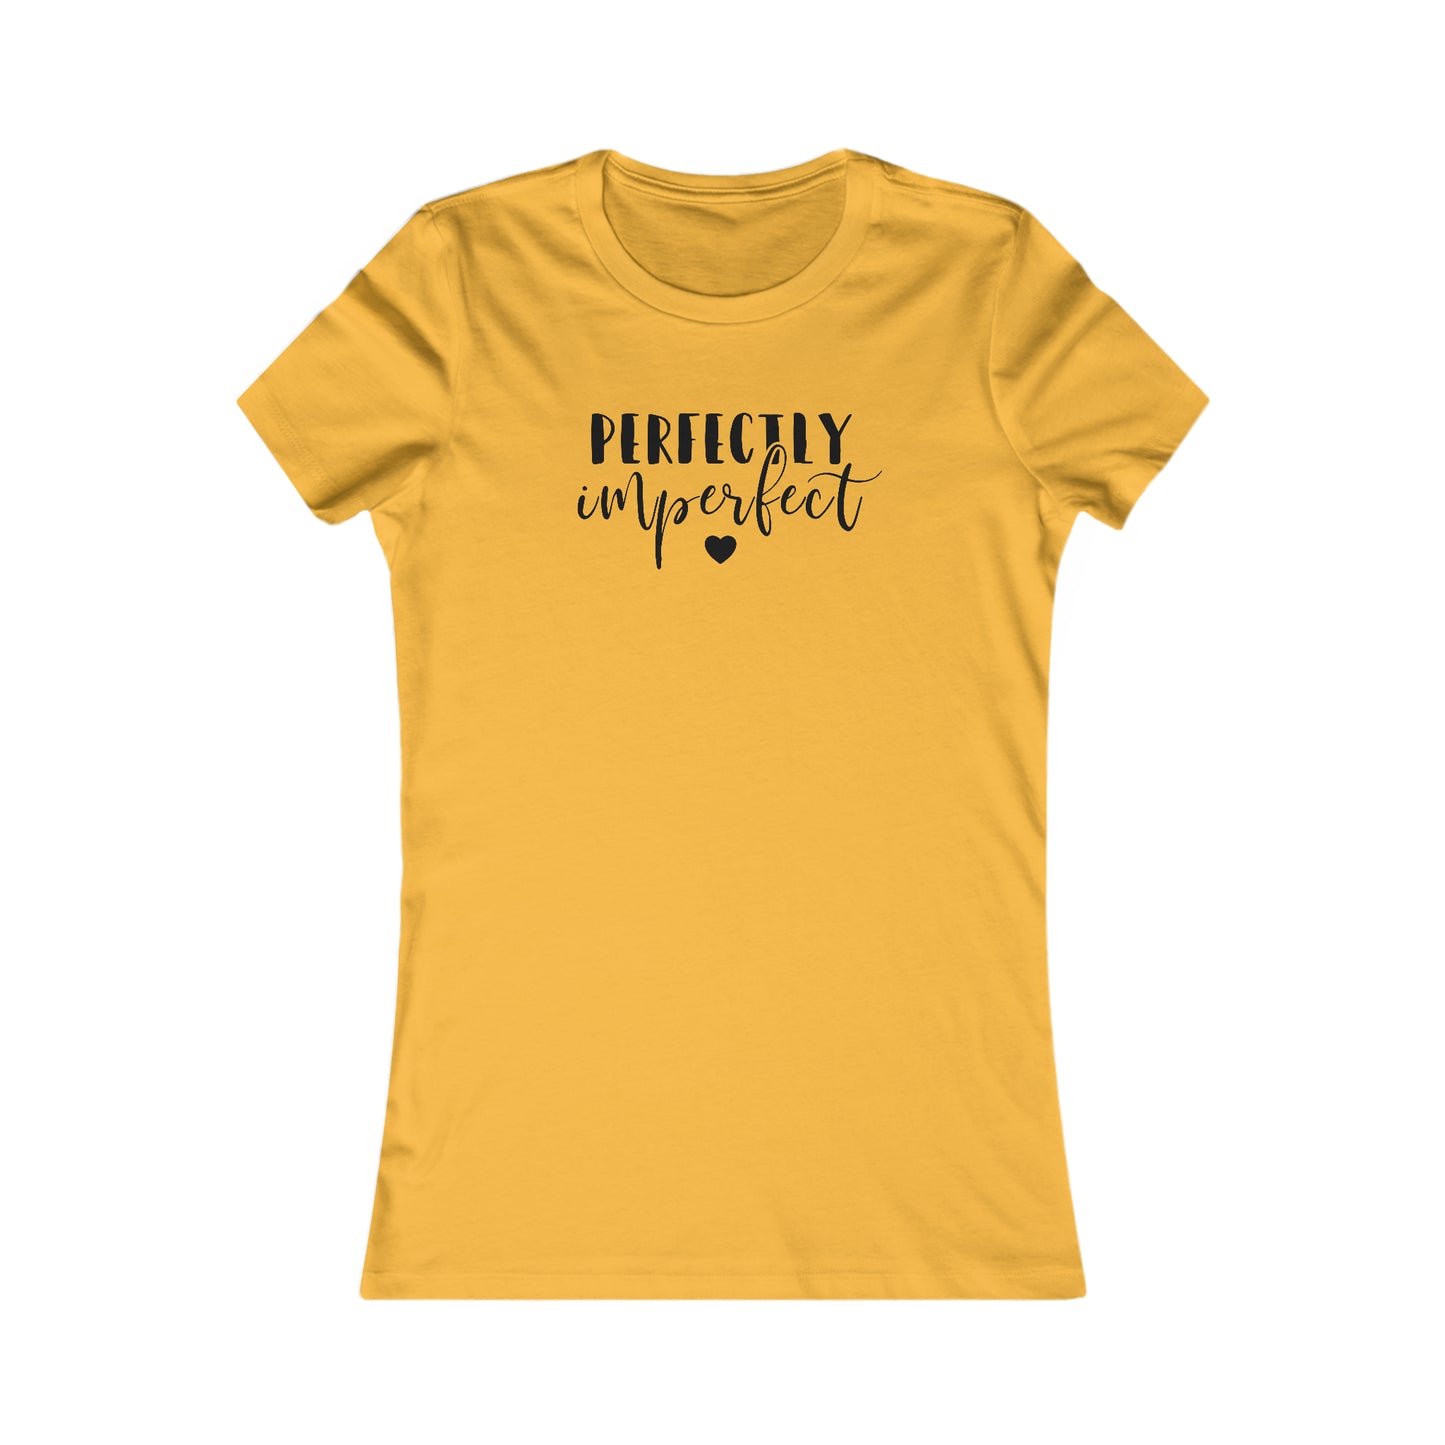 Perfectly Imperfect - Women's Favorite Tee